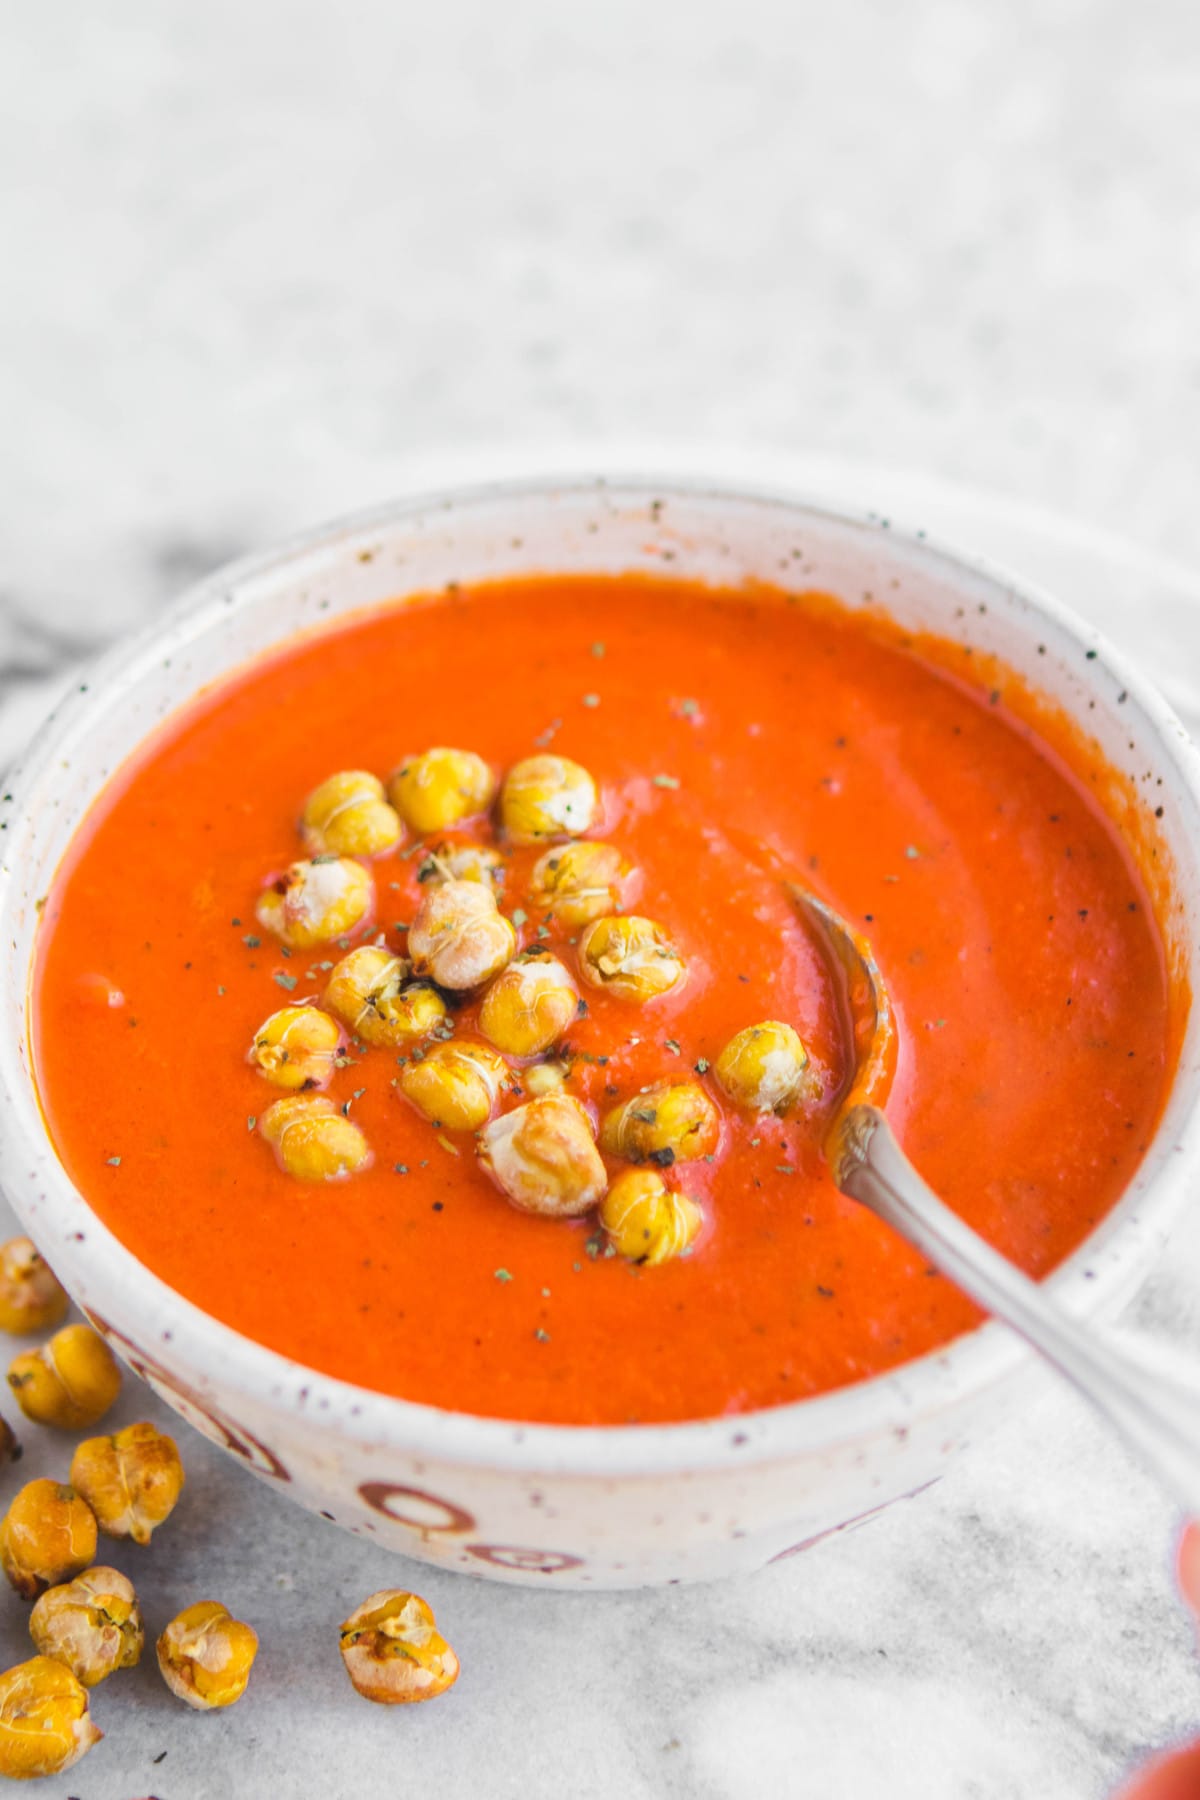 This Vegan Tomato & Red Pepper Soup is an easy weeknight dinner and perfect for meal prep! #vegan #mealprep #plantbased #tomatosoup #glutenfree #oilfree